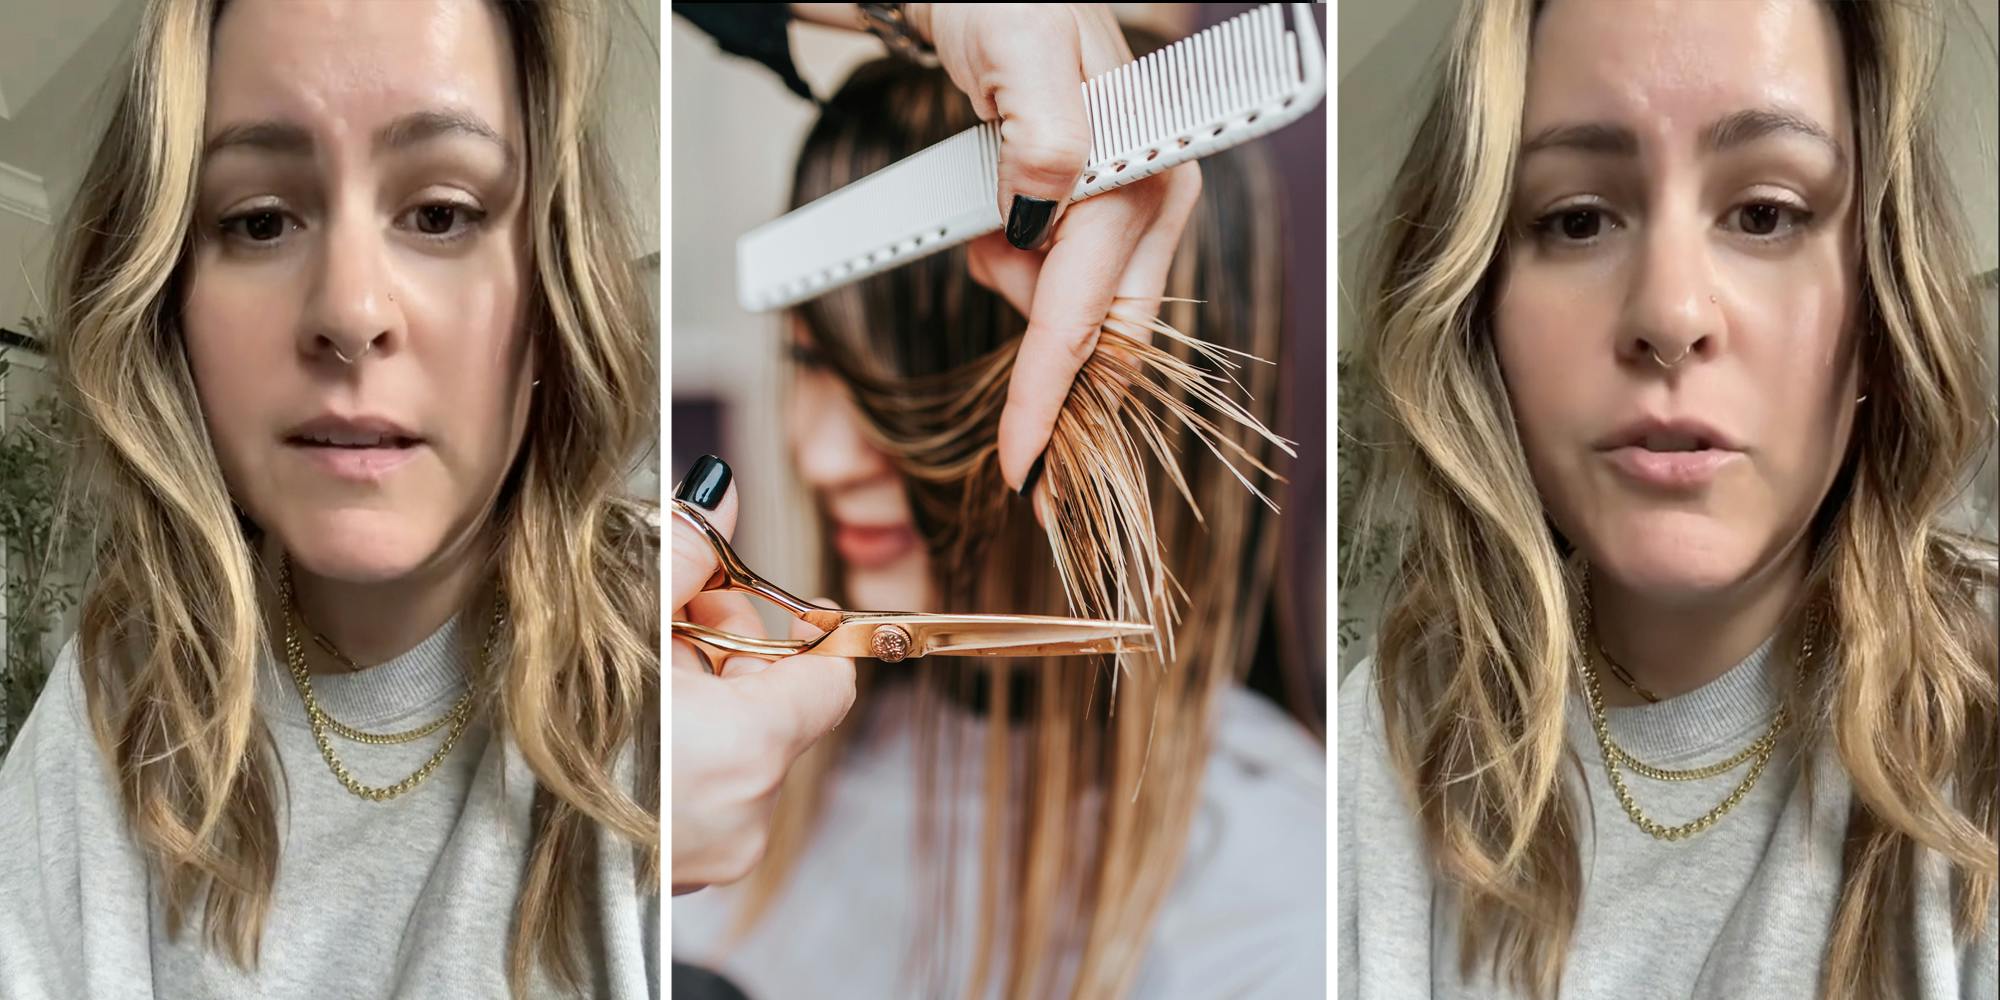 ‘I promise we will never fault you for that’: Stylist shares tricks for getting your hair done while you’re at work